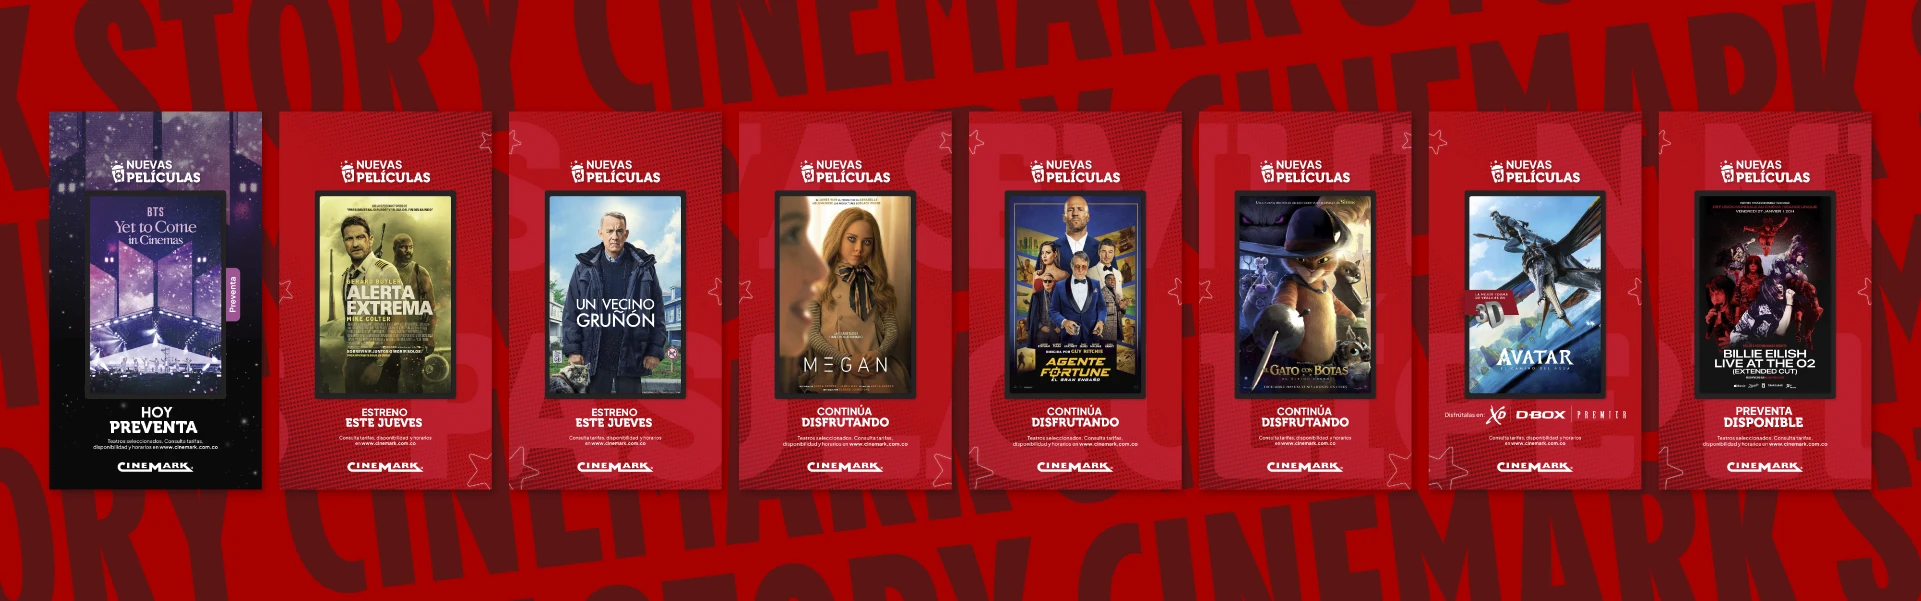 facebook publications alluding to the movies screened by cinemark